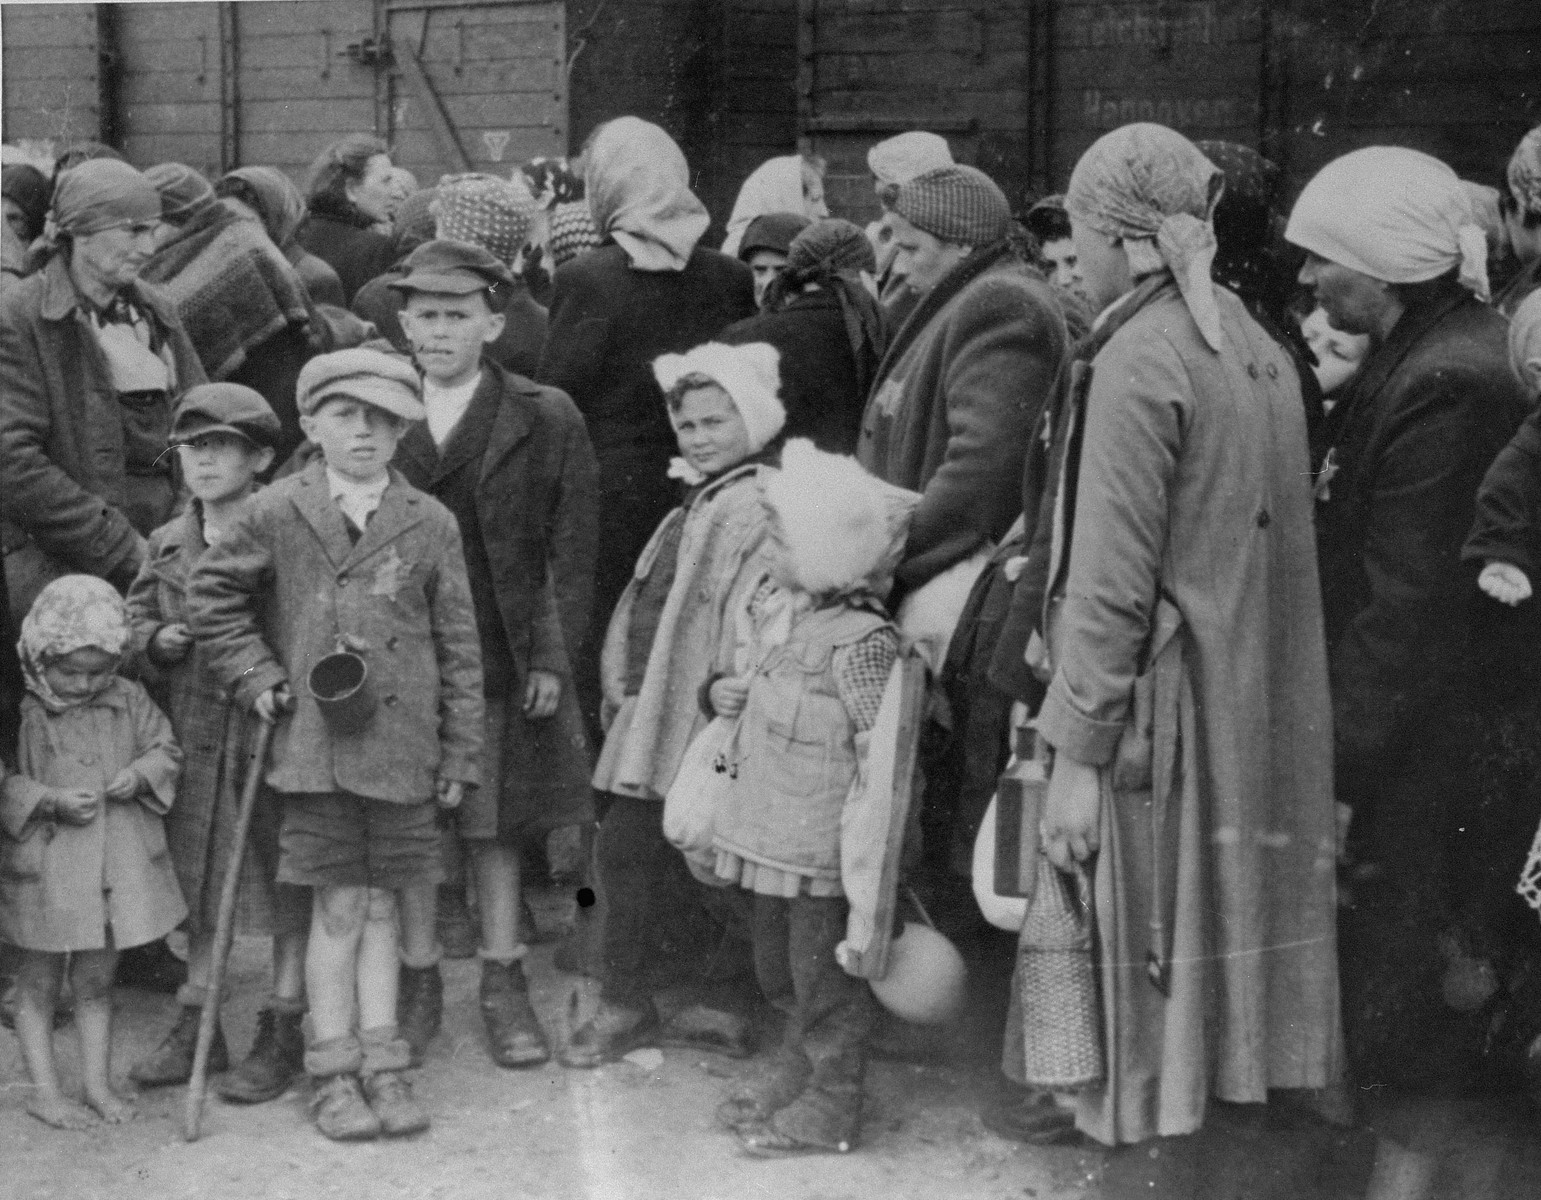 Jewish women and children from Subcarpathian Rus await selection on the ramp at Auschwitz-Birkenau.

Lili Jacob's has identified aunt Tauba with her four children.  The woman in the center with the two girls wearing rabbit fur hats have been identified as either Bozsi Iskovics Engel (b. 1904) from Beregszasz with her two daughters Agota Engel (b. 1933) and Judith Engel (b. 1936) or Breine Slomovics with her two daughters.